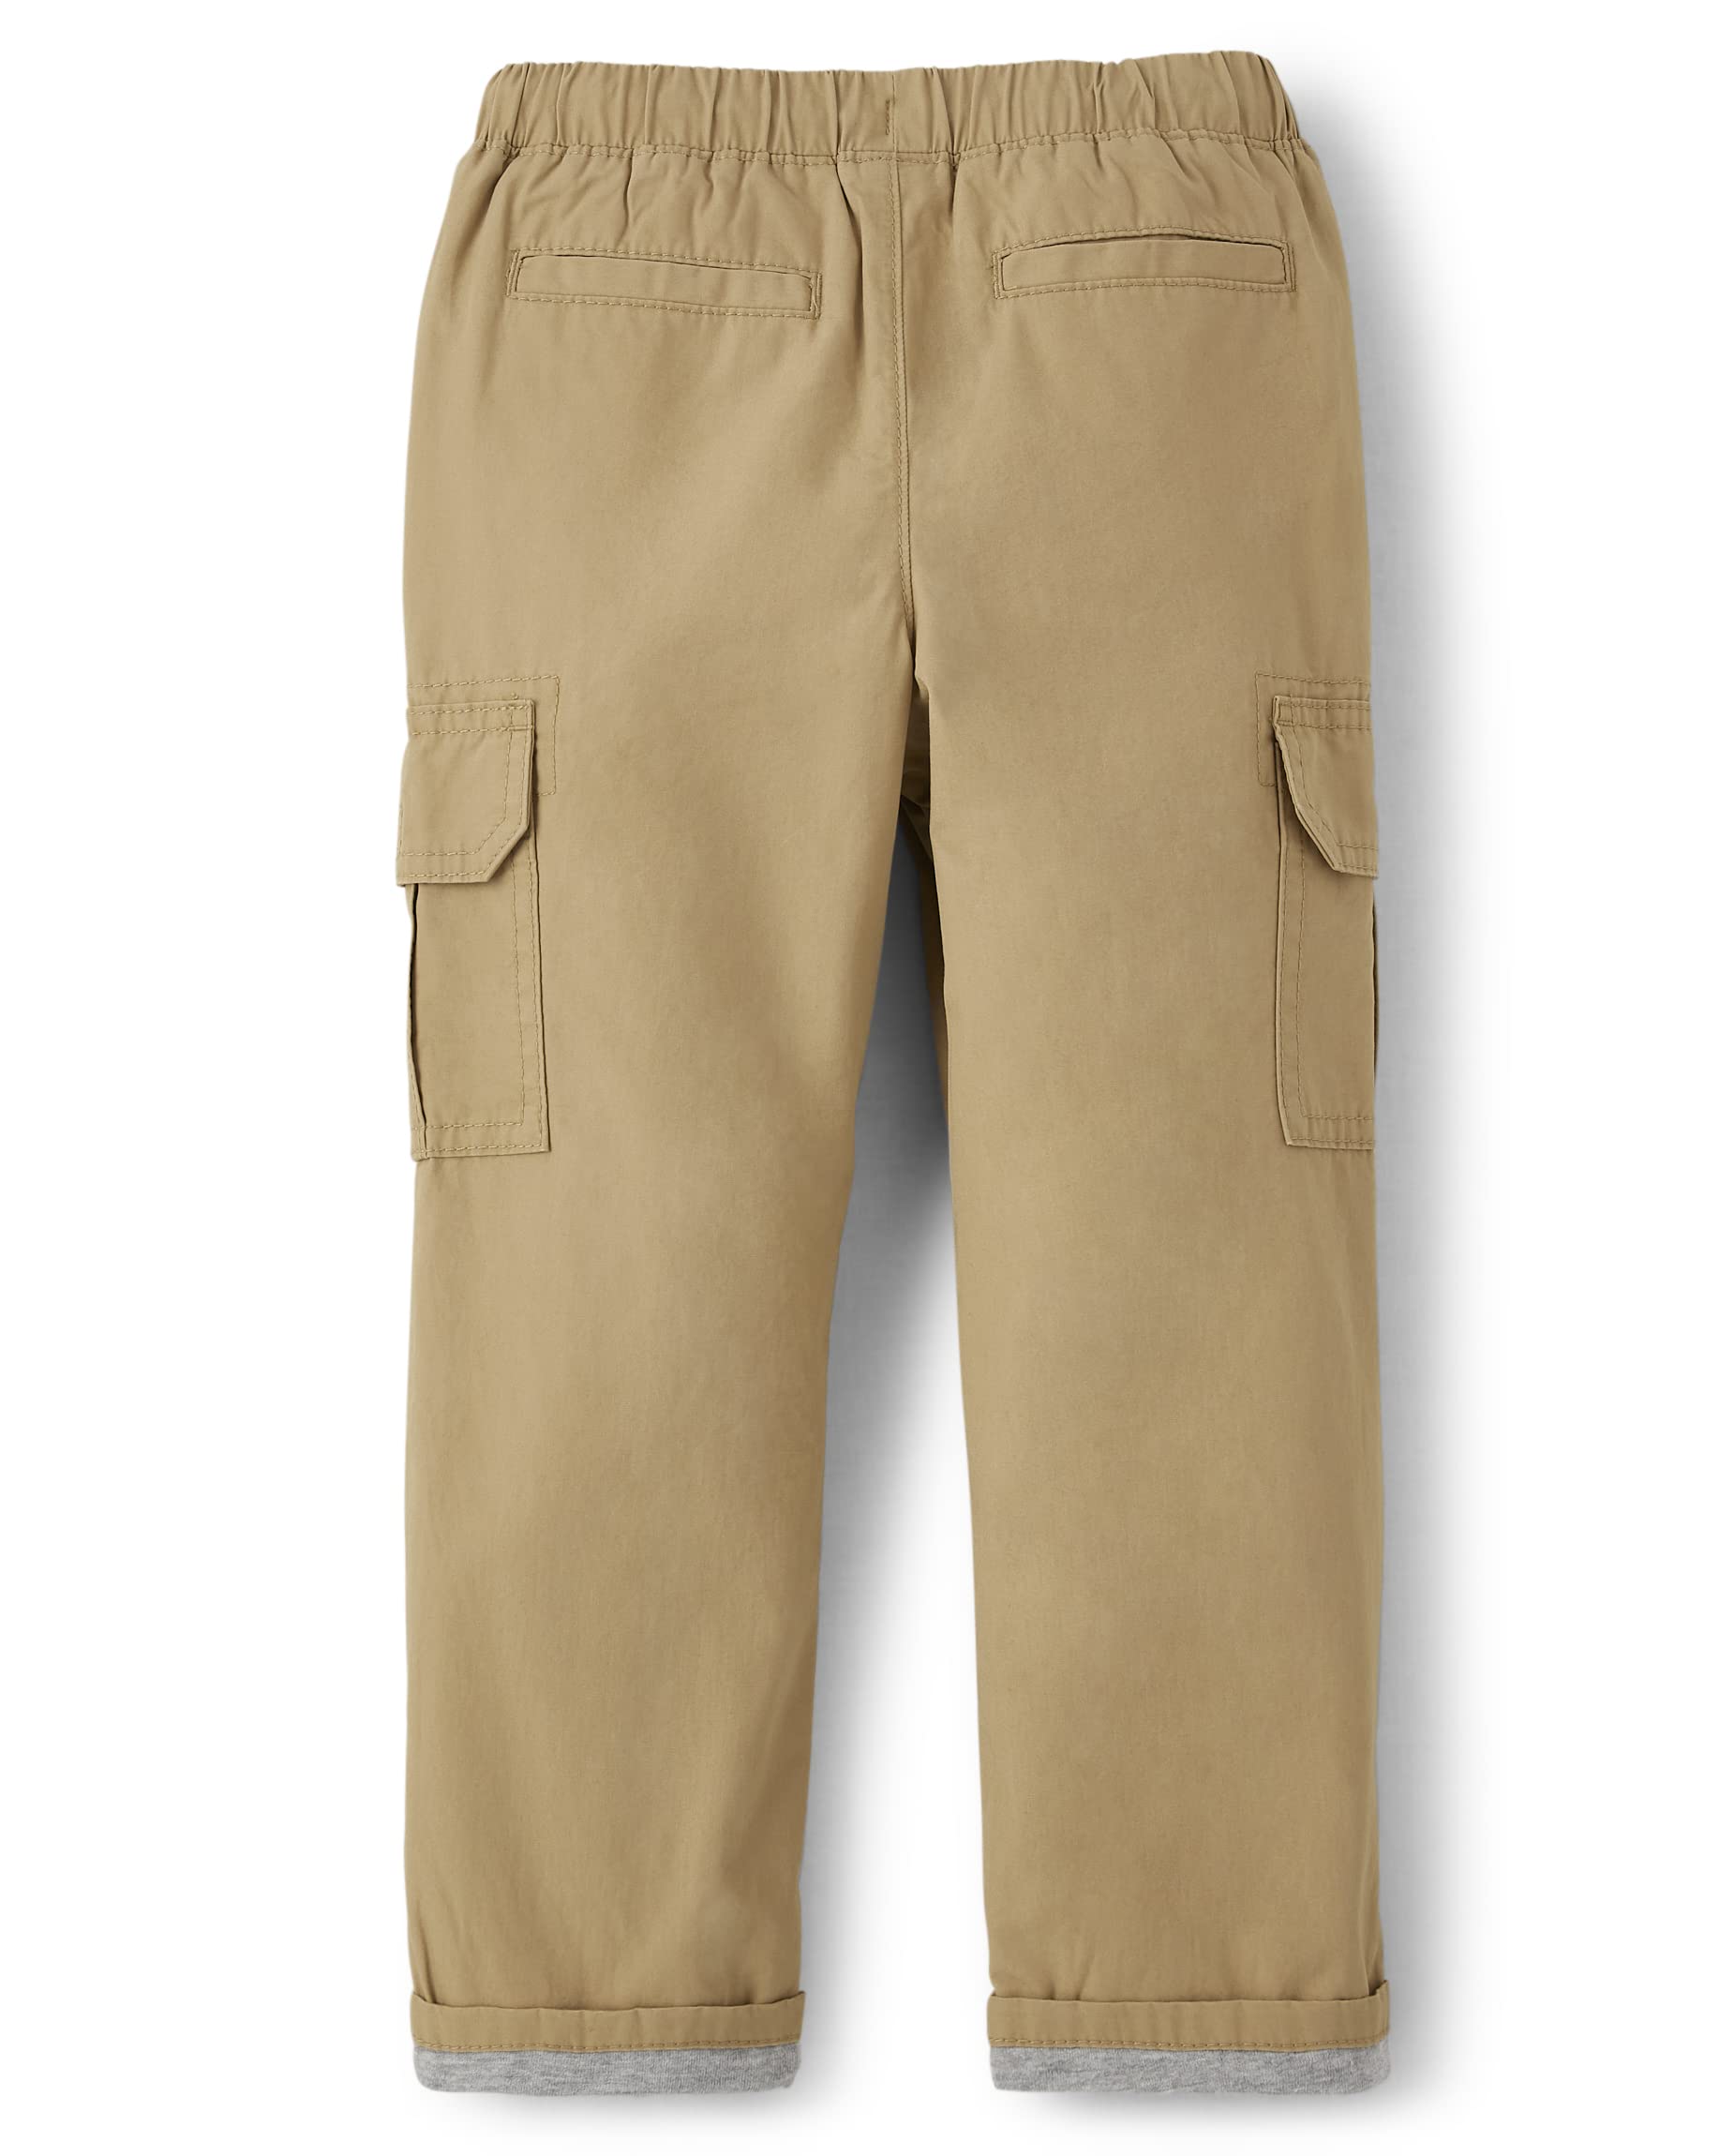 Gymboree Boys and Toddler Woven Pull On Lined Cargo Pants